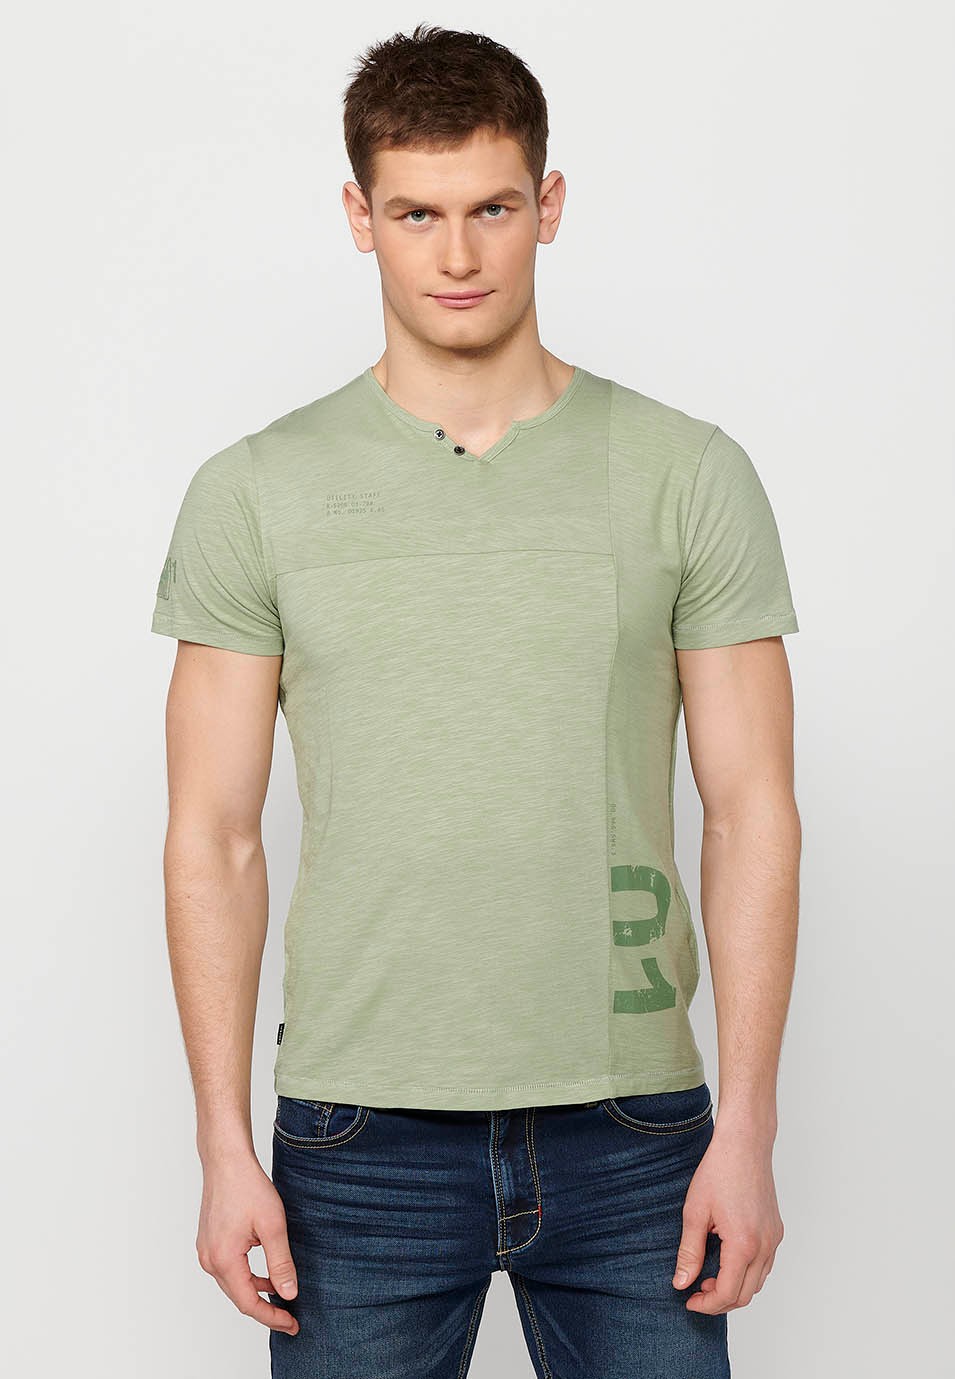  Men's kakhi short-sleeved cotton t-shirt, round neck with button opening